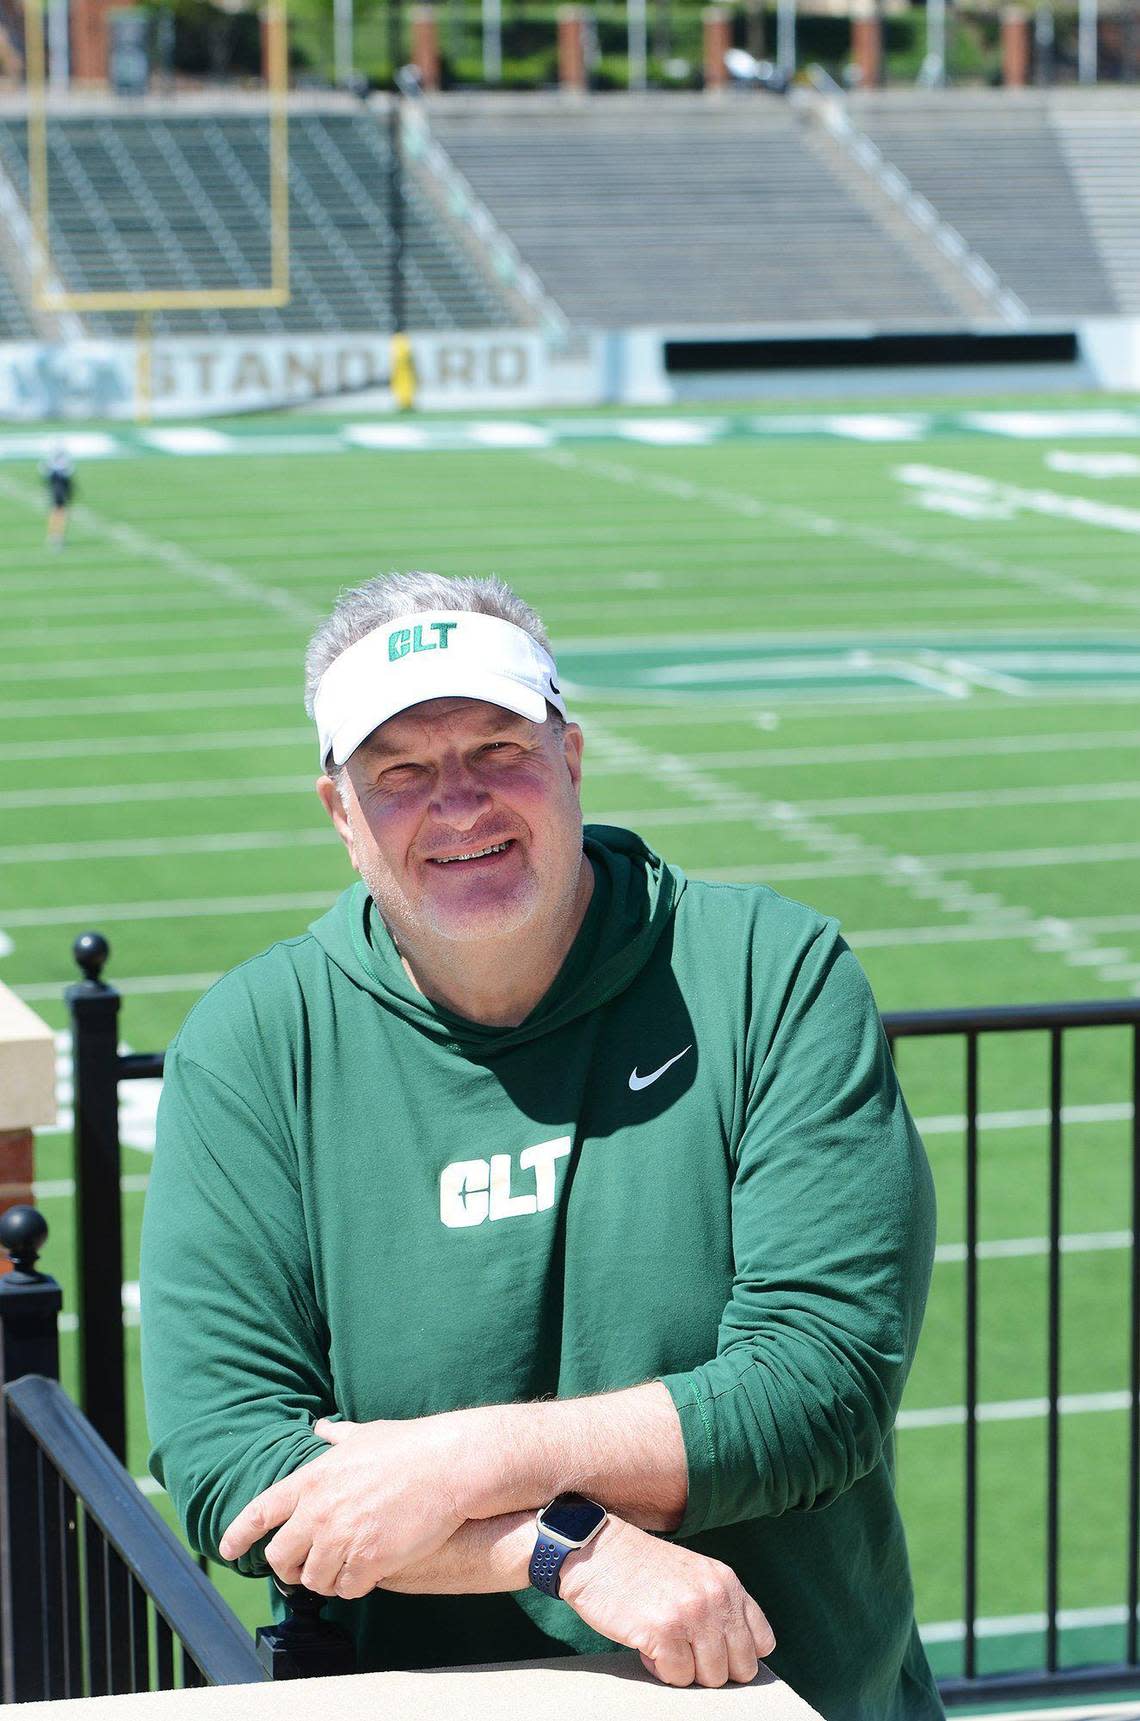 Biff Poggi, 62, was named the head football coach of the Charlotte 49ers in November 2022. Poggi sat down for an interview on Tuesday, April 11, 2023. His most recent previous football experience was as associate head coach at the University of Michigan.